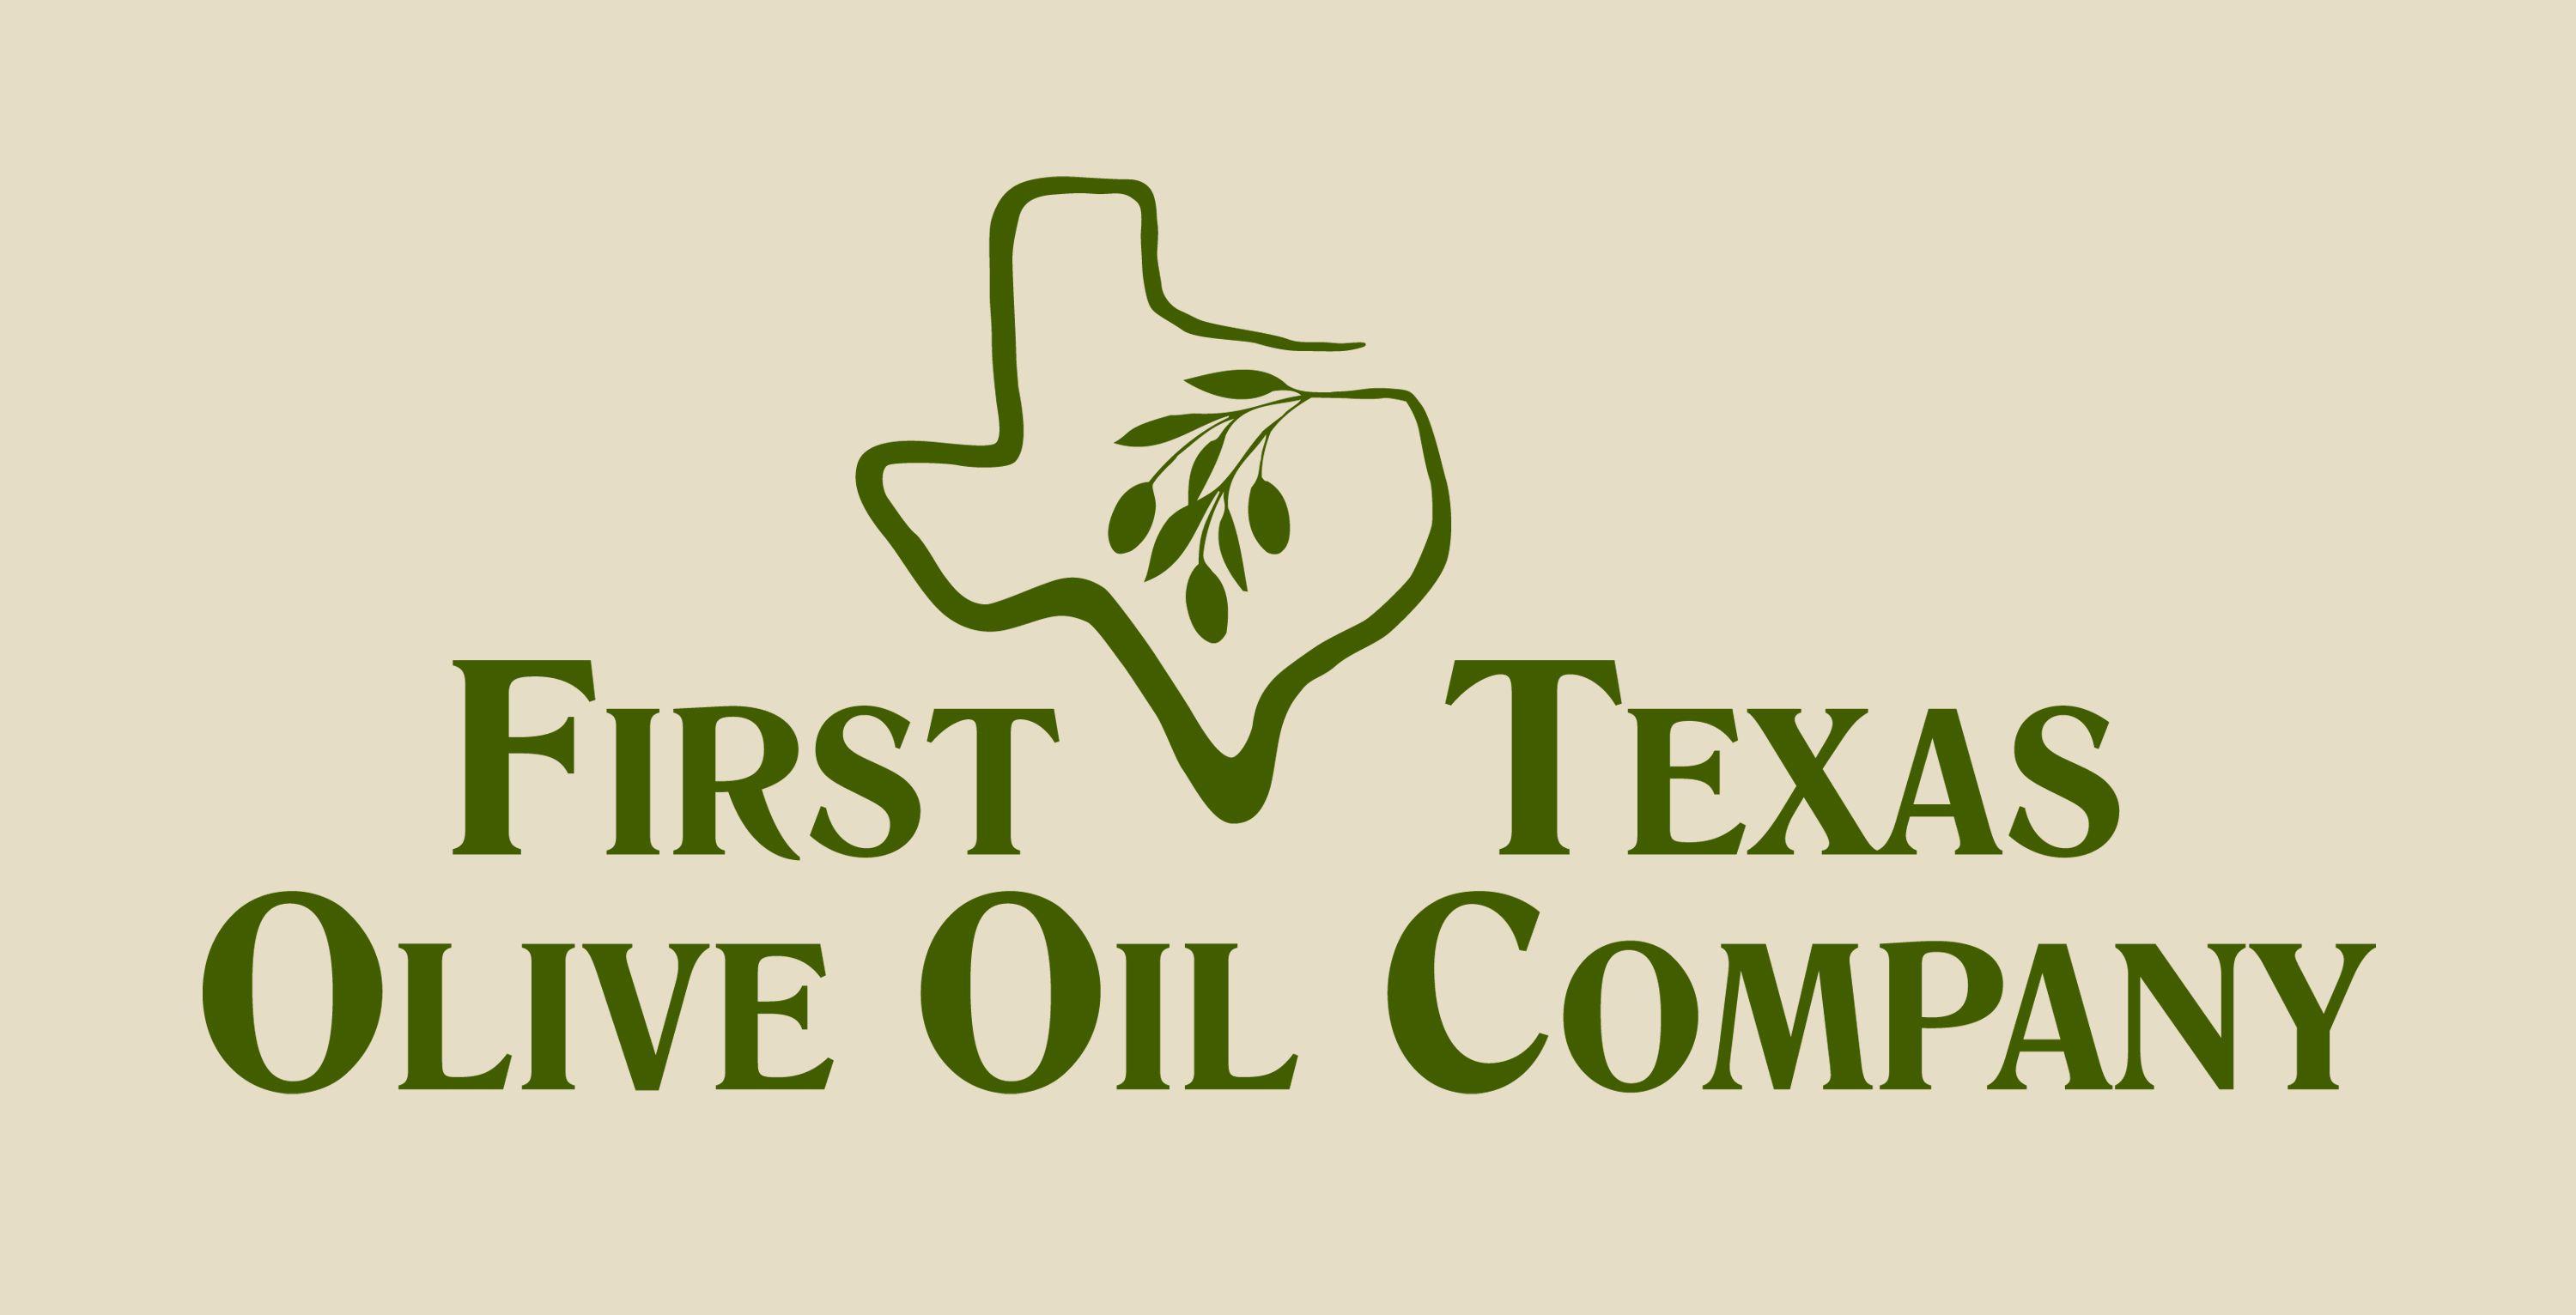 Texas Oil Company Logo - Jeremy Newman | First Texas Olive Oil Company